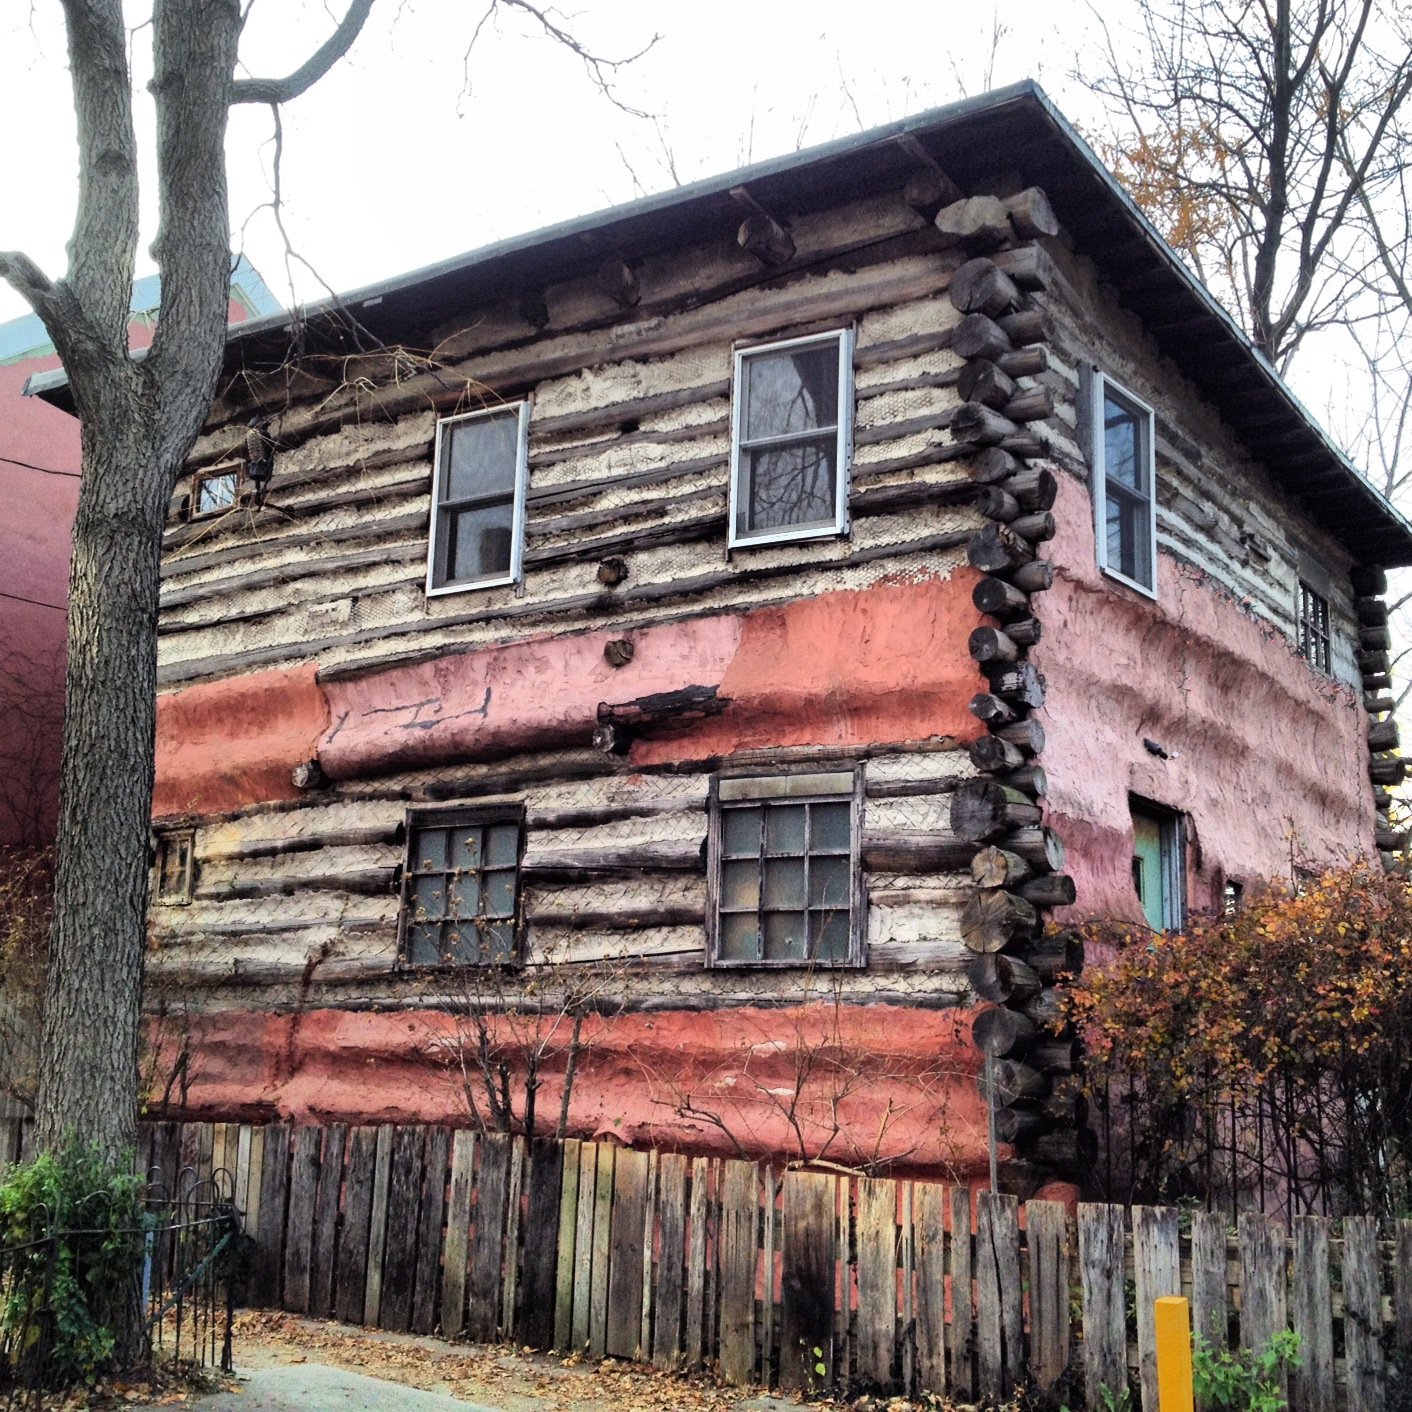 North Lawrence Street's 'log cabin' was built by artist Jeff Thomas.